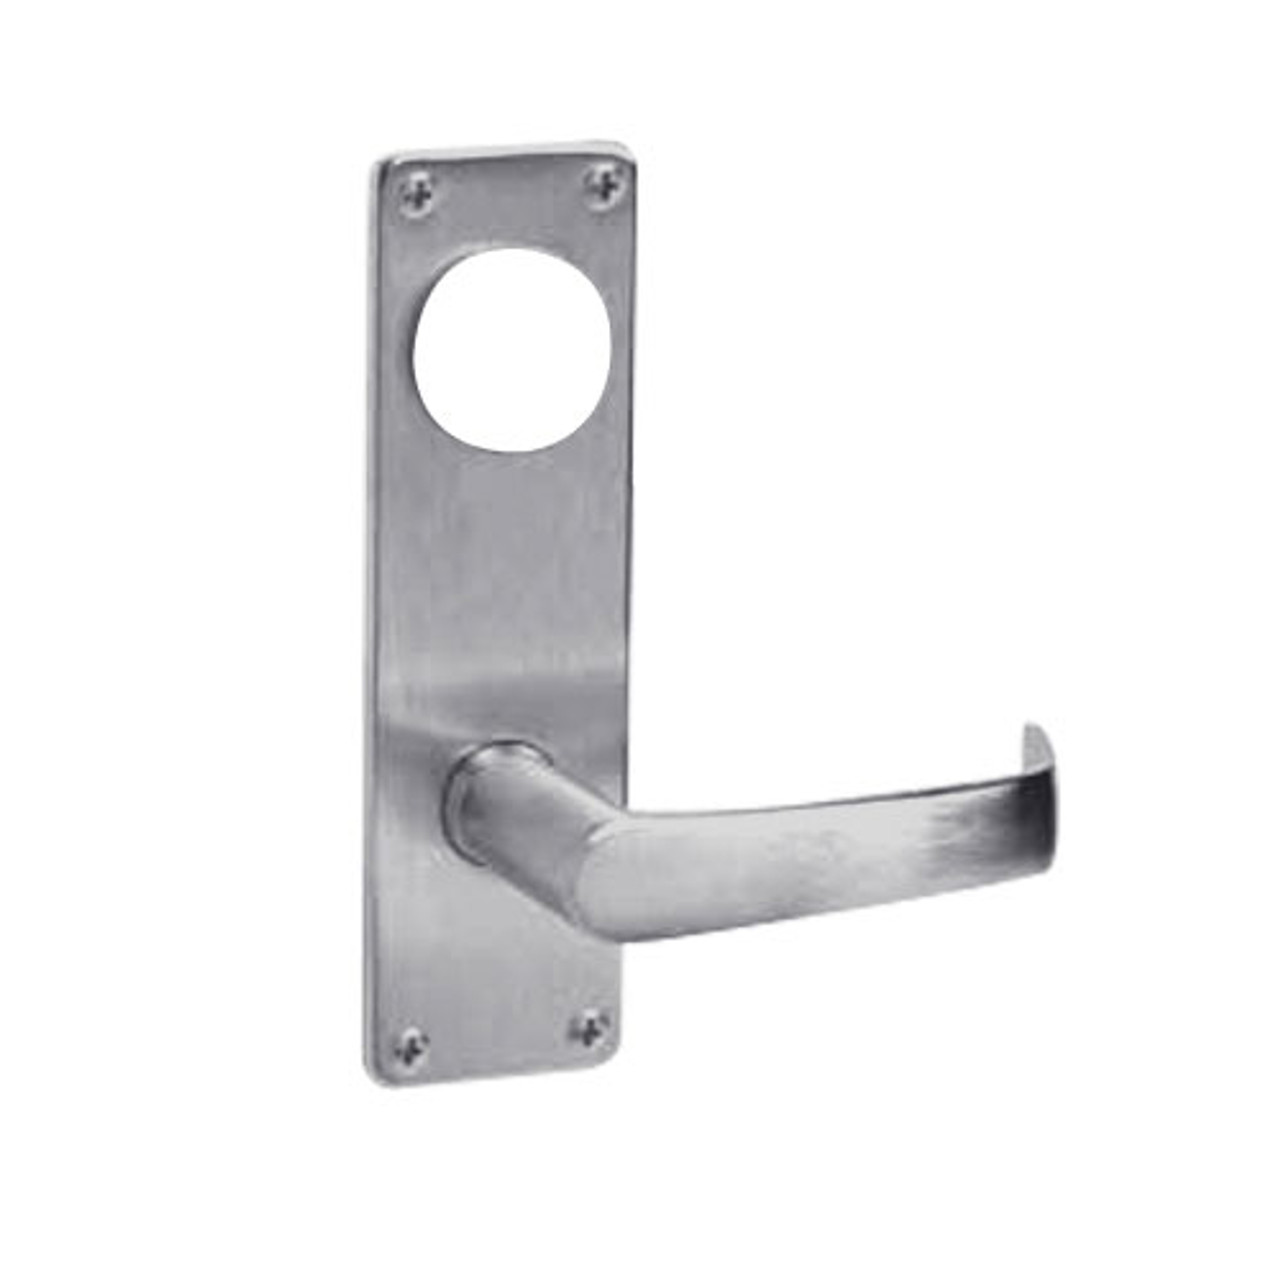 ML2048-NSN-626-LC Corbin Russwin ML2000 Series Mortise Entrance Locksets with Newport Lever in Satin Chrome